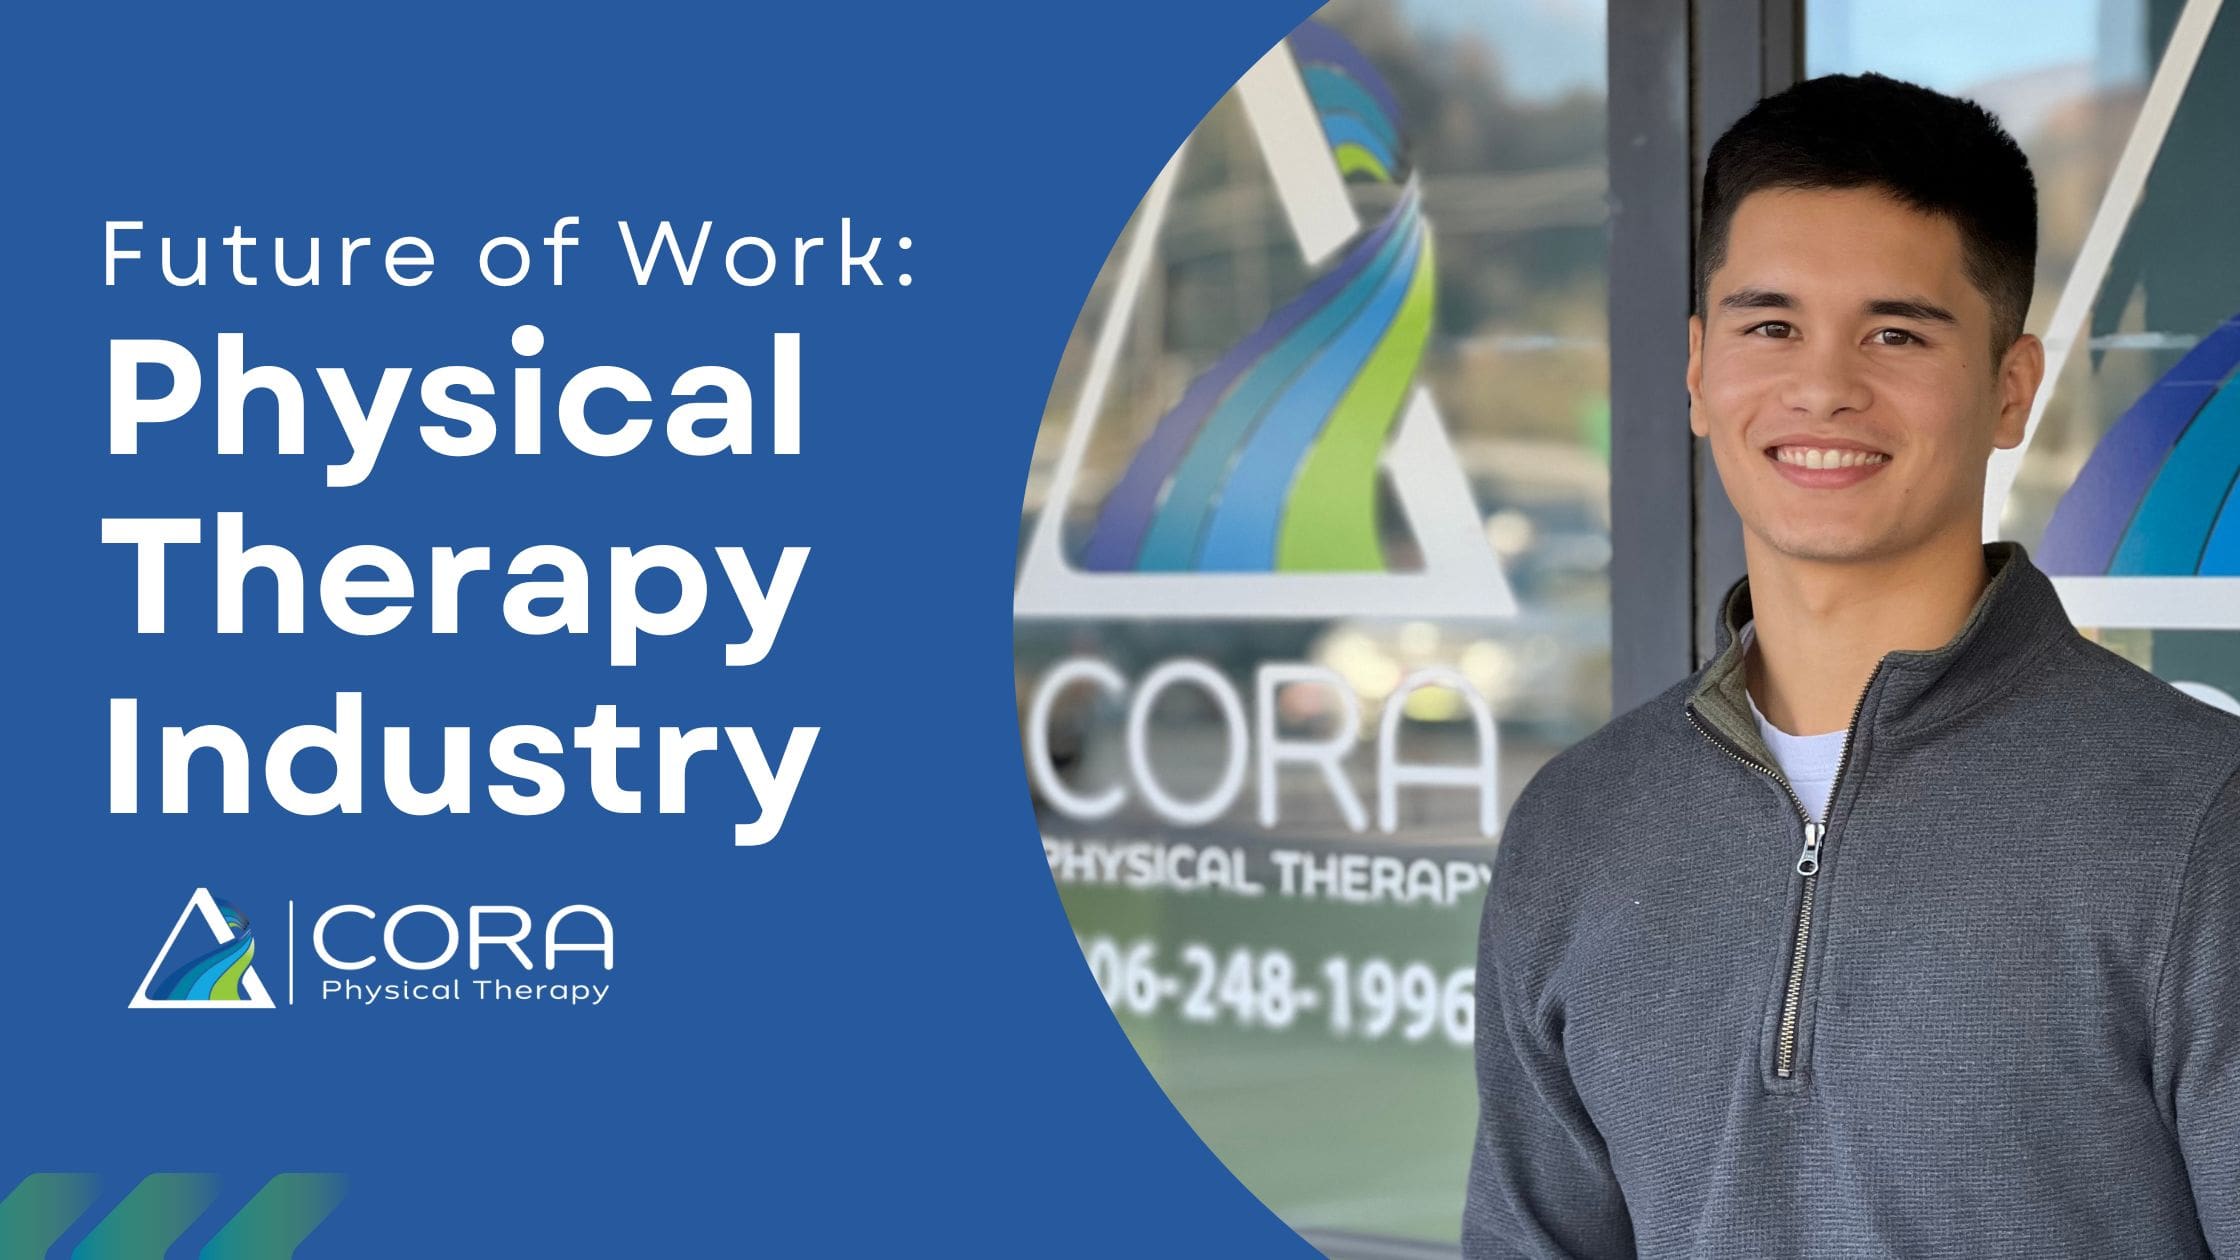 Future of Work: Physical Therapy Industry